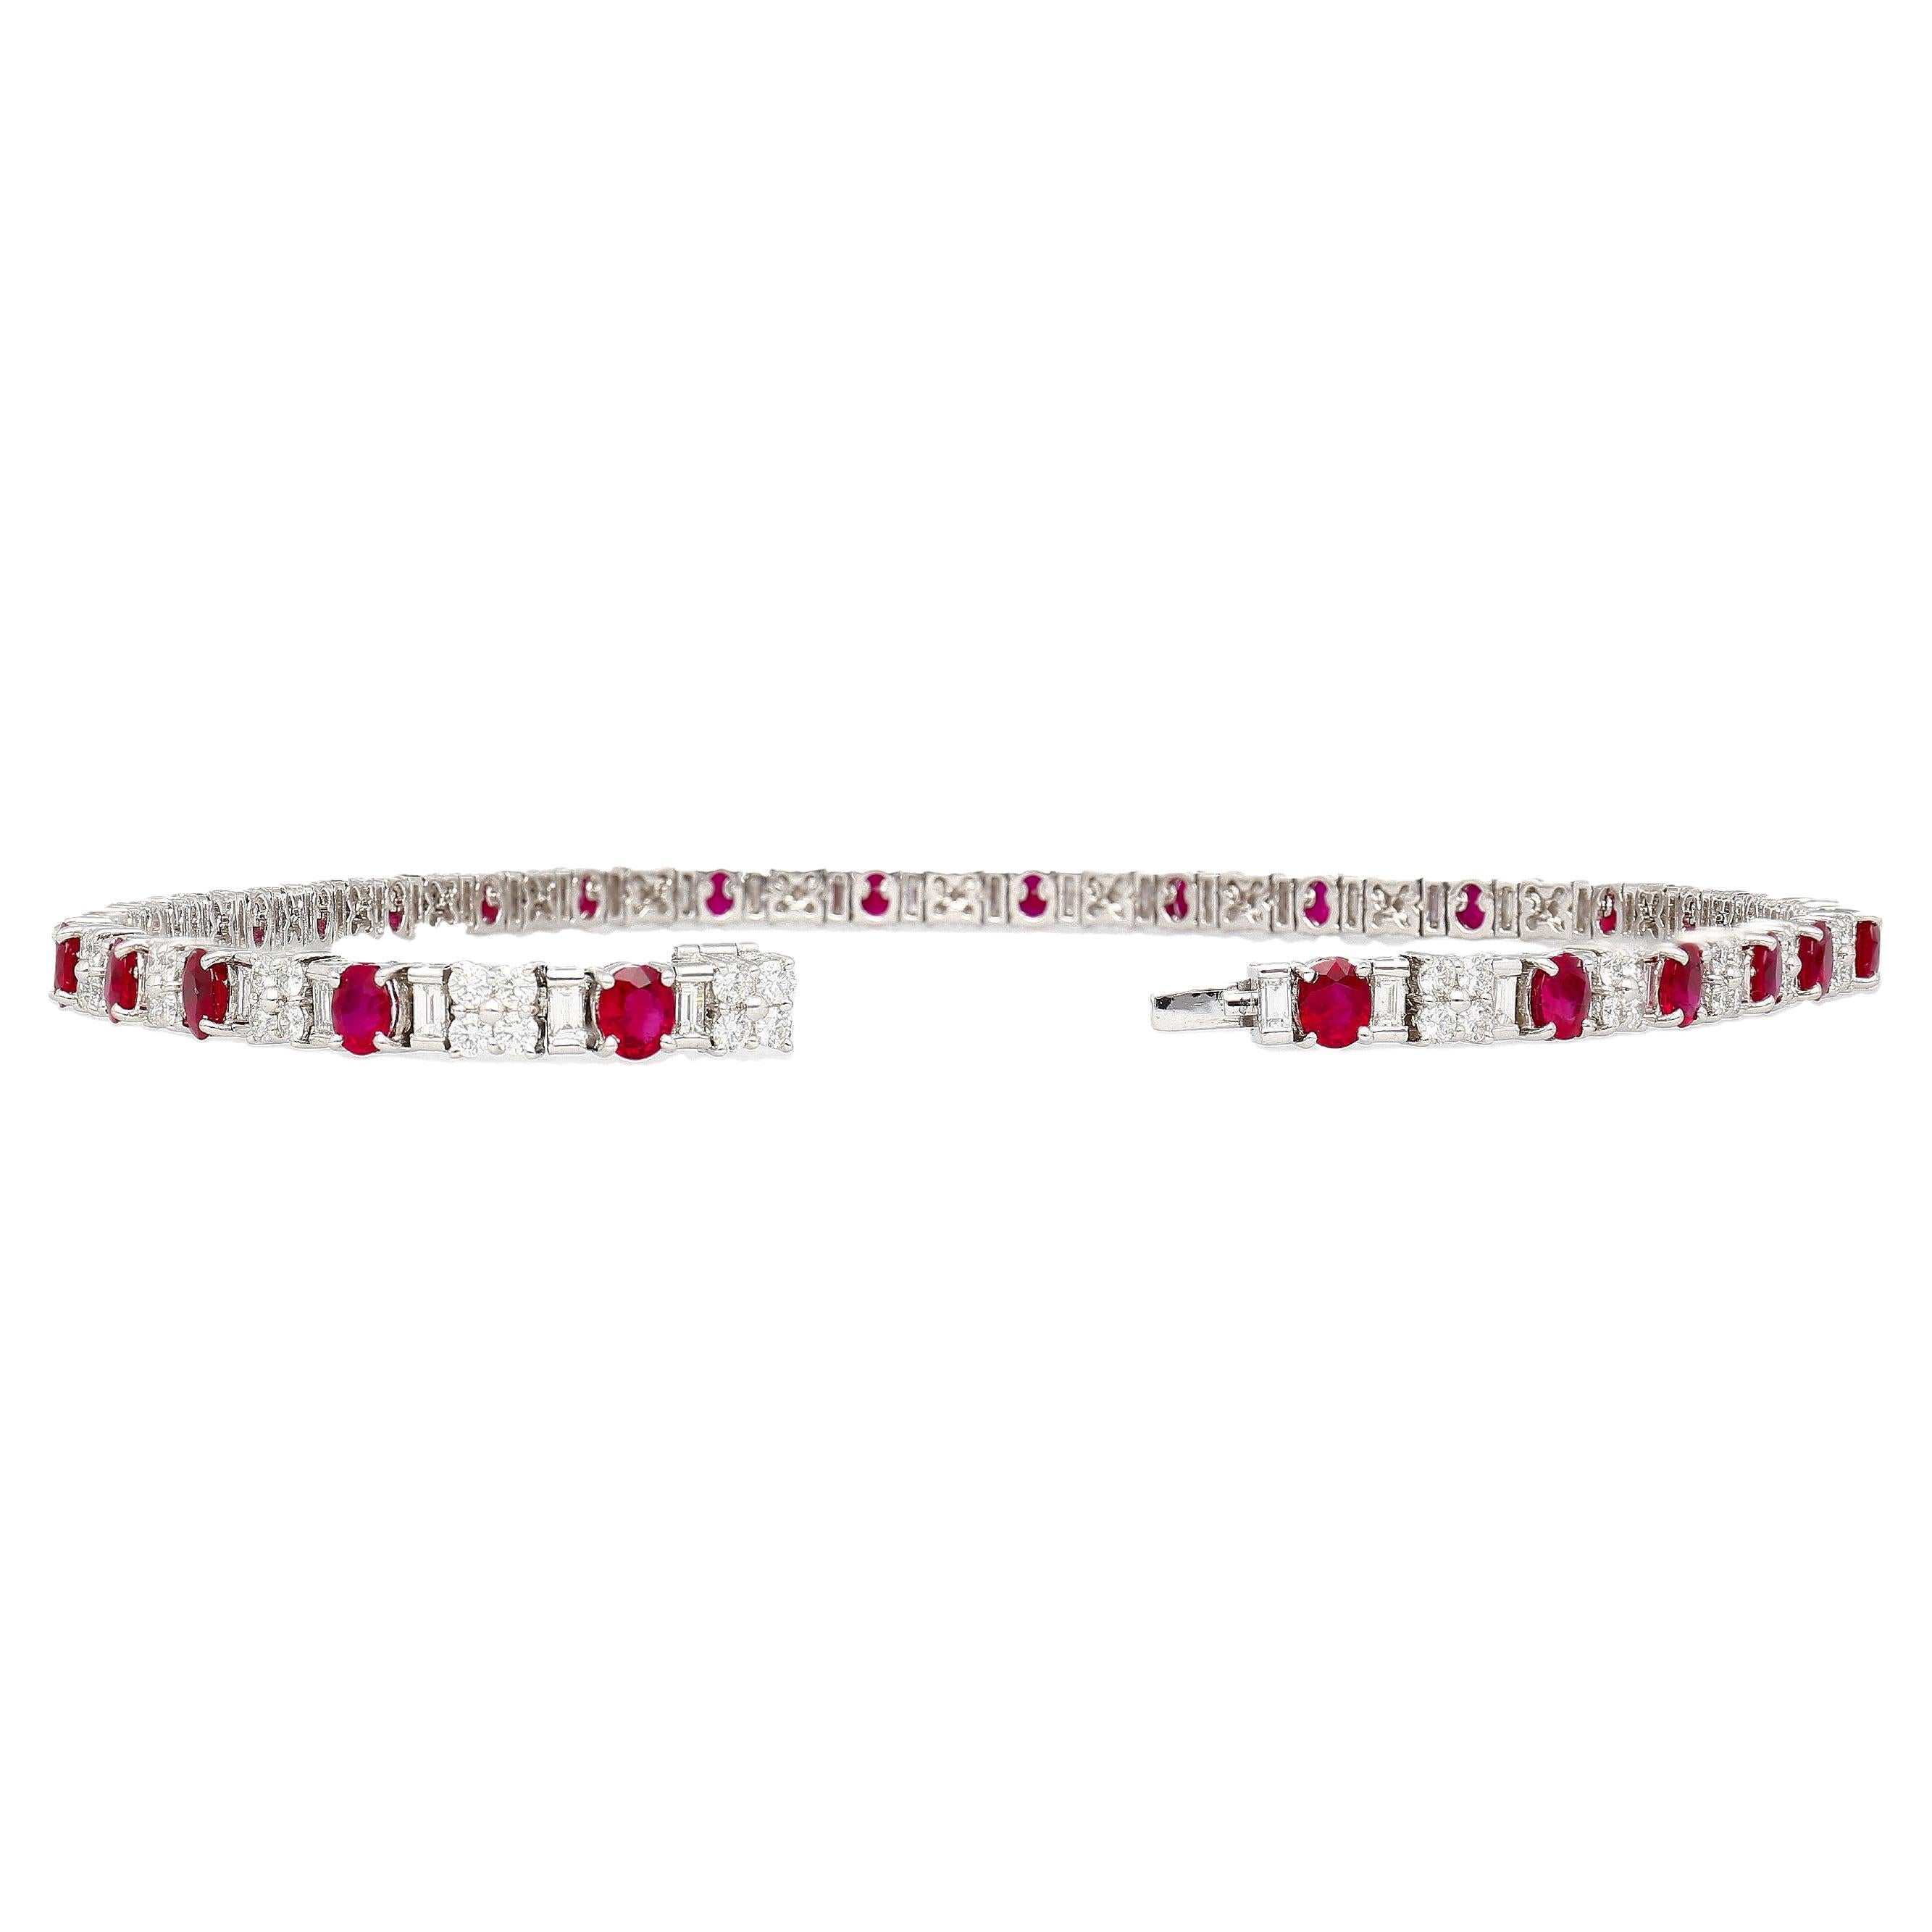 Natural Ruby and Diamond tennis necklace, set in platinum 900. Featuring 18.68 carats in oval-cut Rubies and 11.72 carats in round and baguette cut Diamonds. The Rubies feature a vibrant, deep red color that wonderfully matches the white and silver